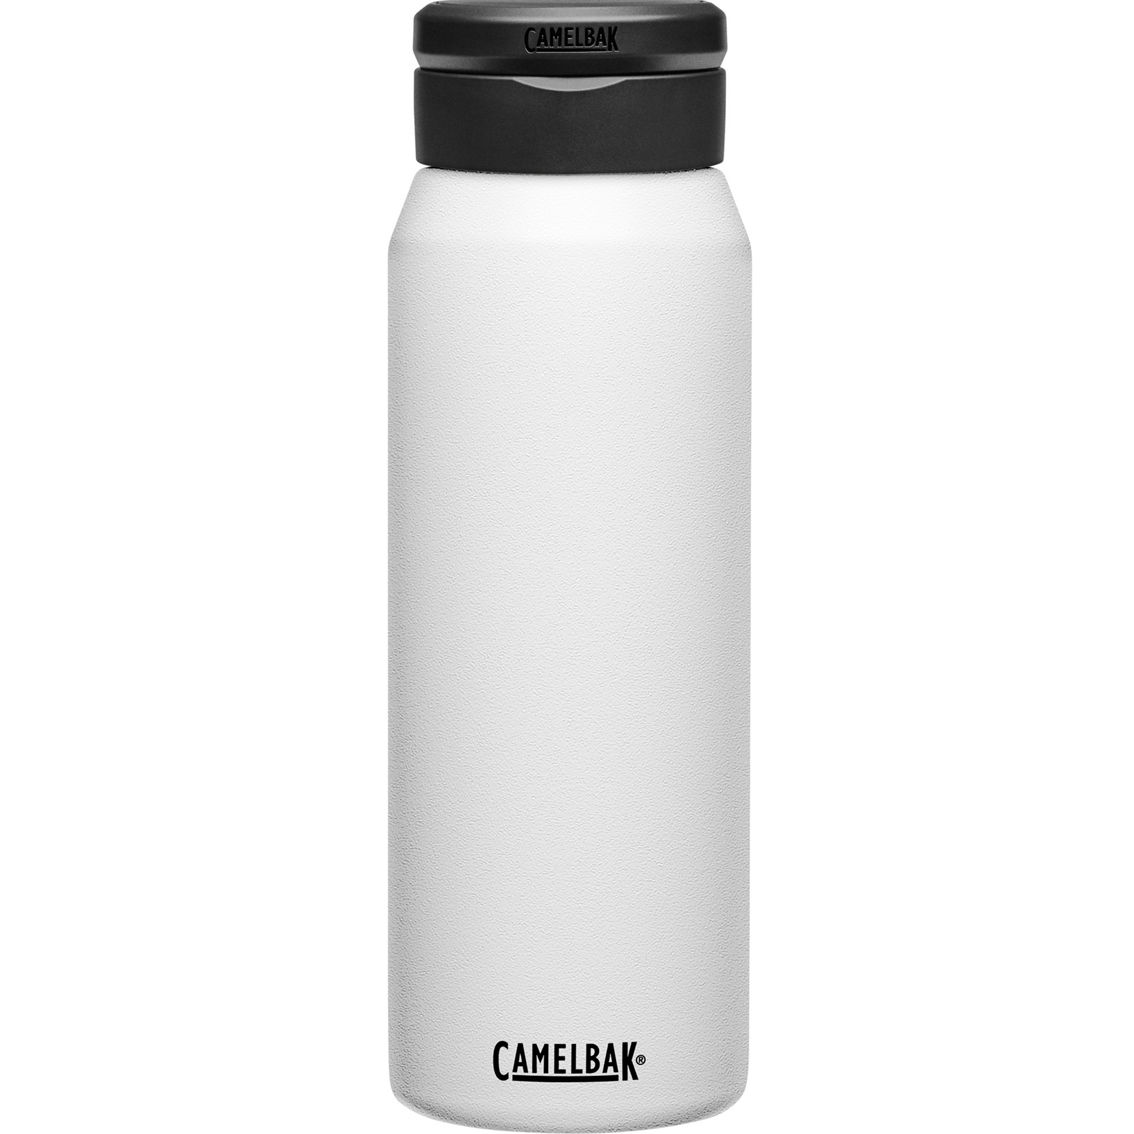 Camelbak Fit Cap Insulated Stainless Steel Water Bottle 32 oz. - Image 5 of 8